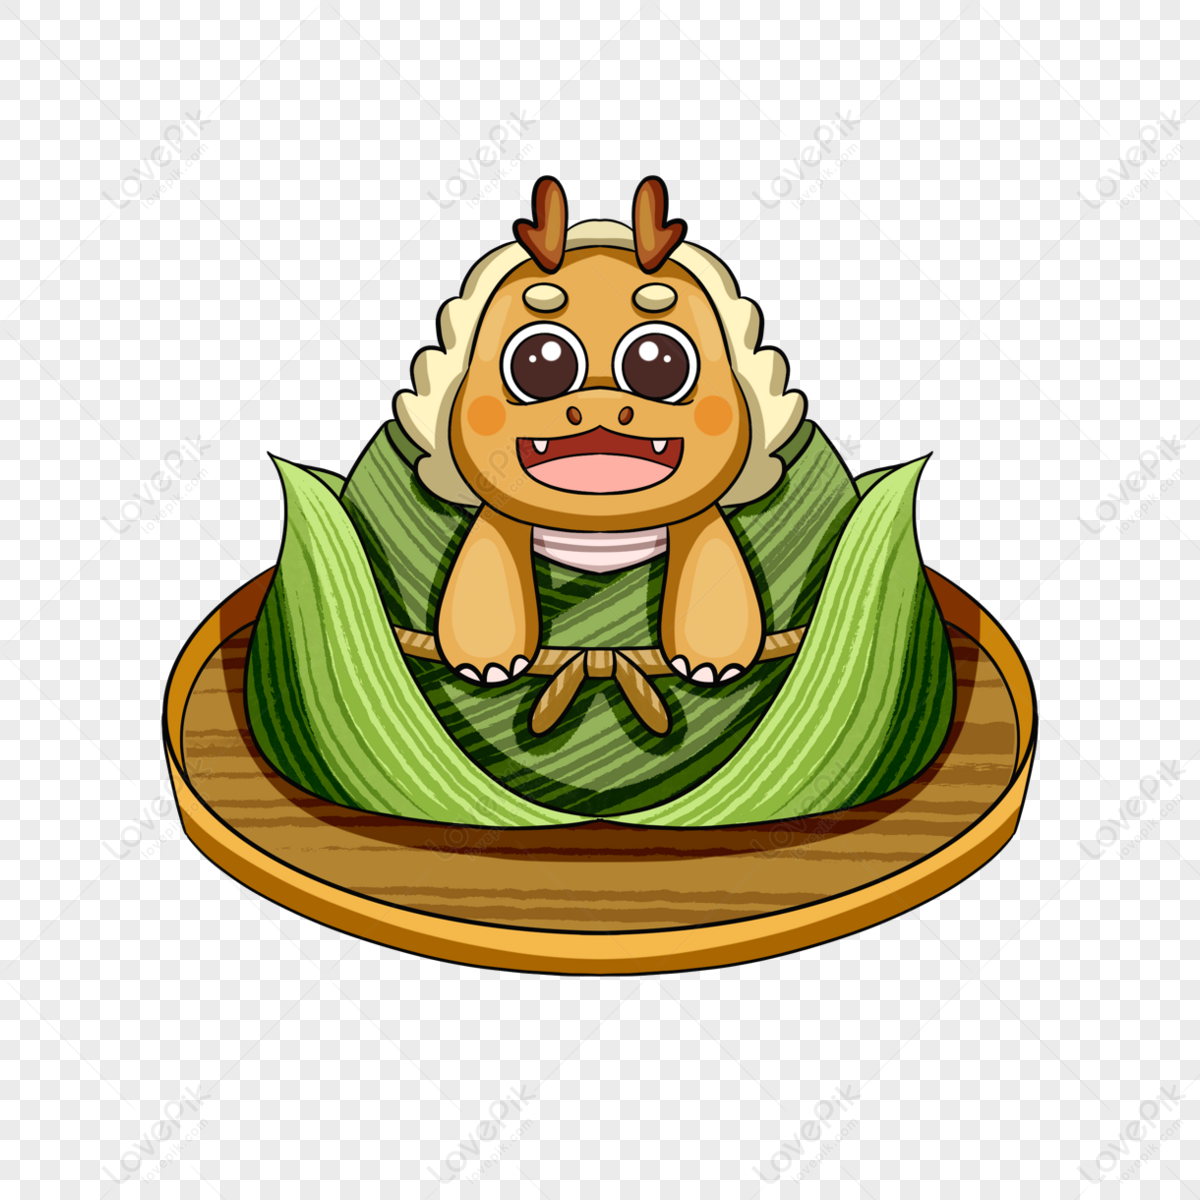 cartoon style dragon dumpling element,scary,cute,color png free download